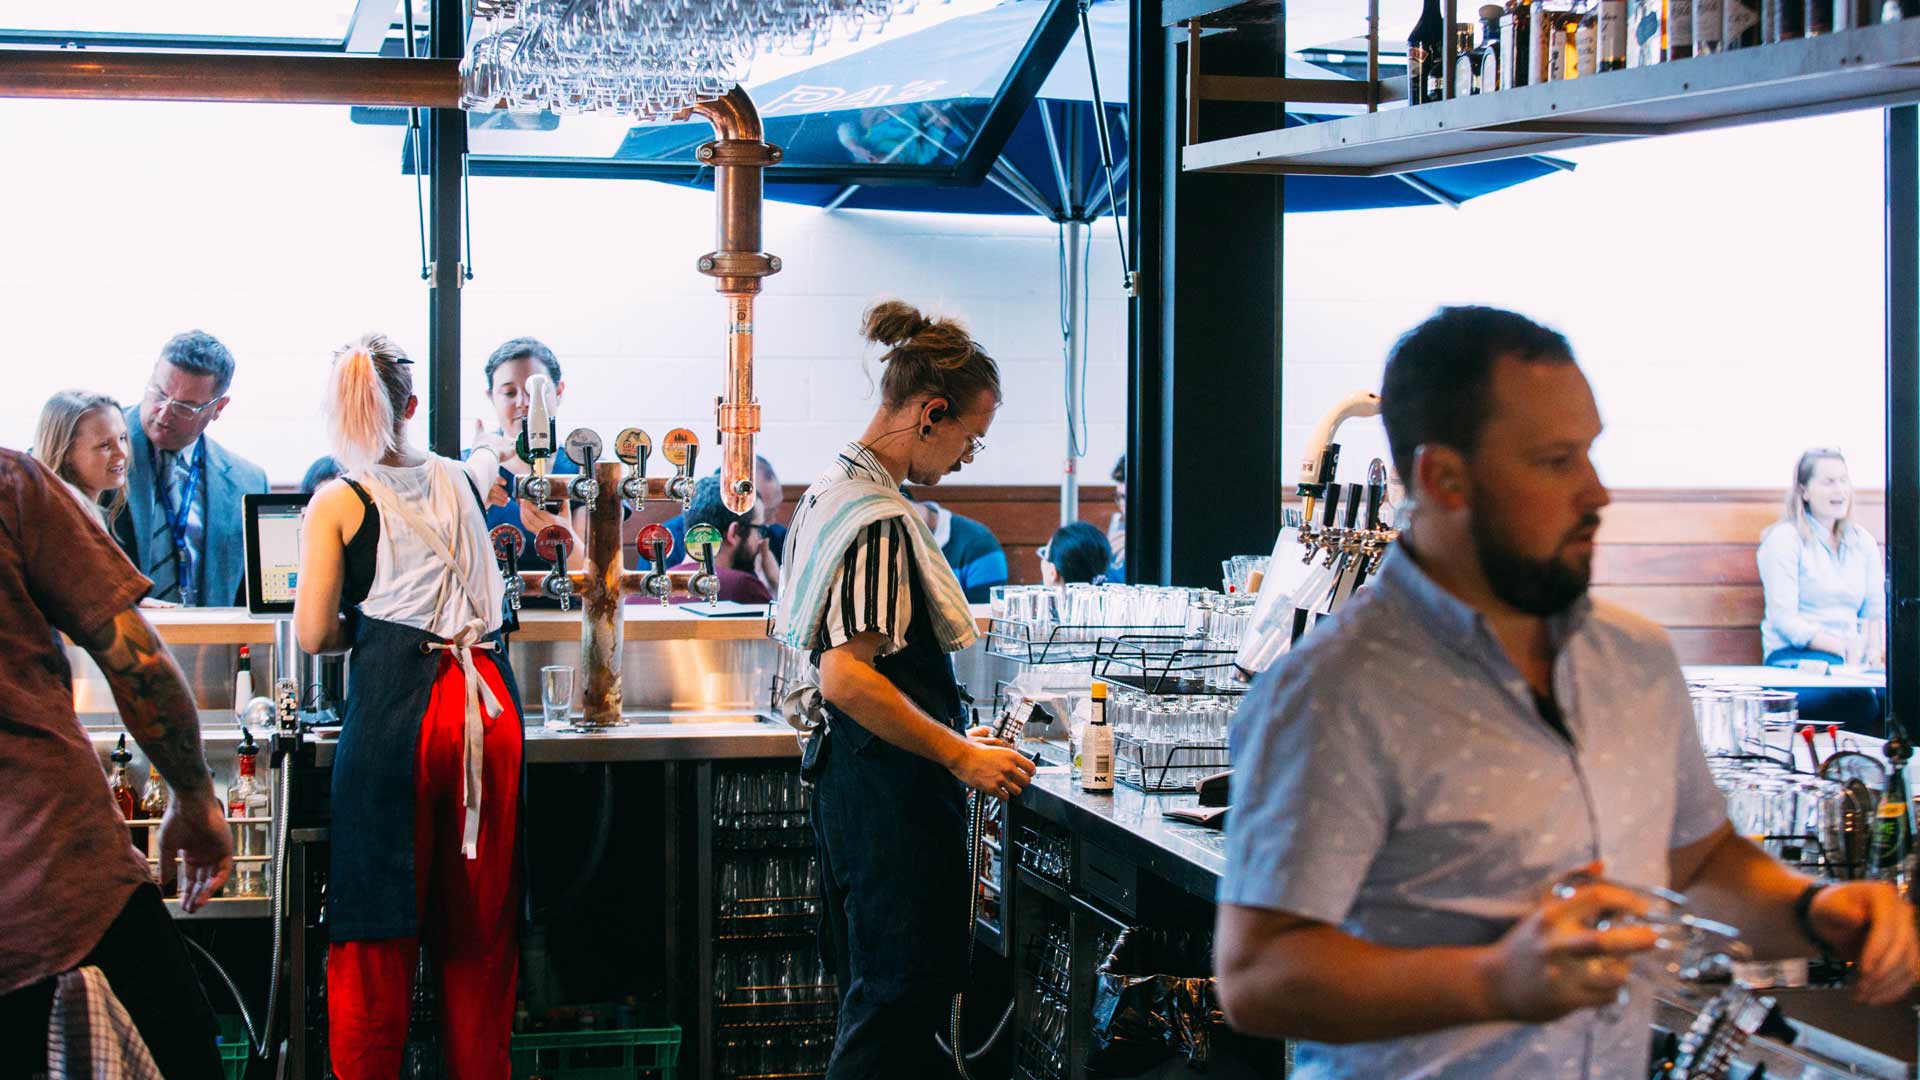 The Revamped Prince Alfred Hotel Adds a Rooftop Bar to its Offering